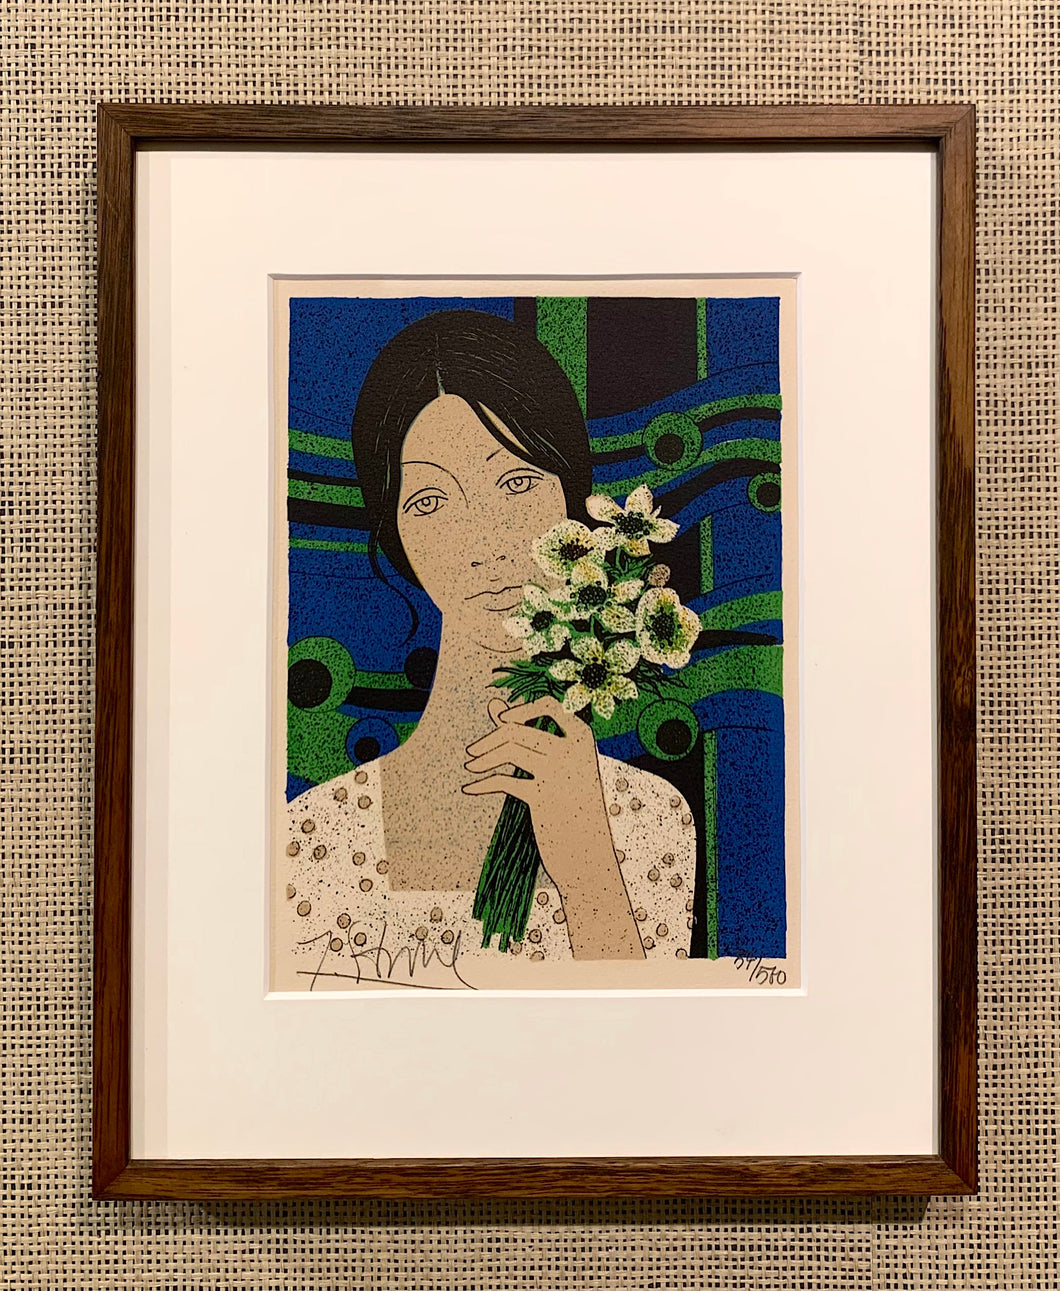 'Woman with Flowers' by Yves Ganne